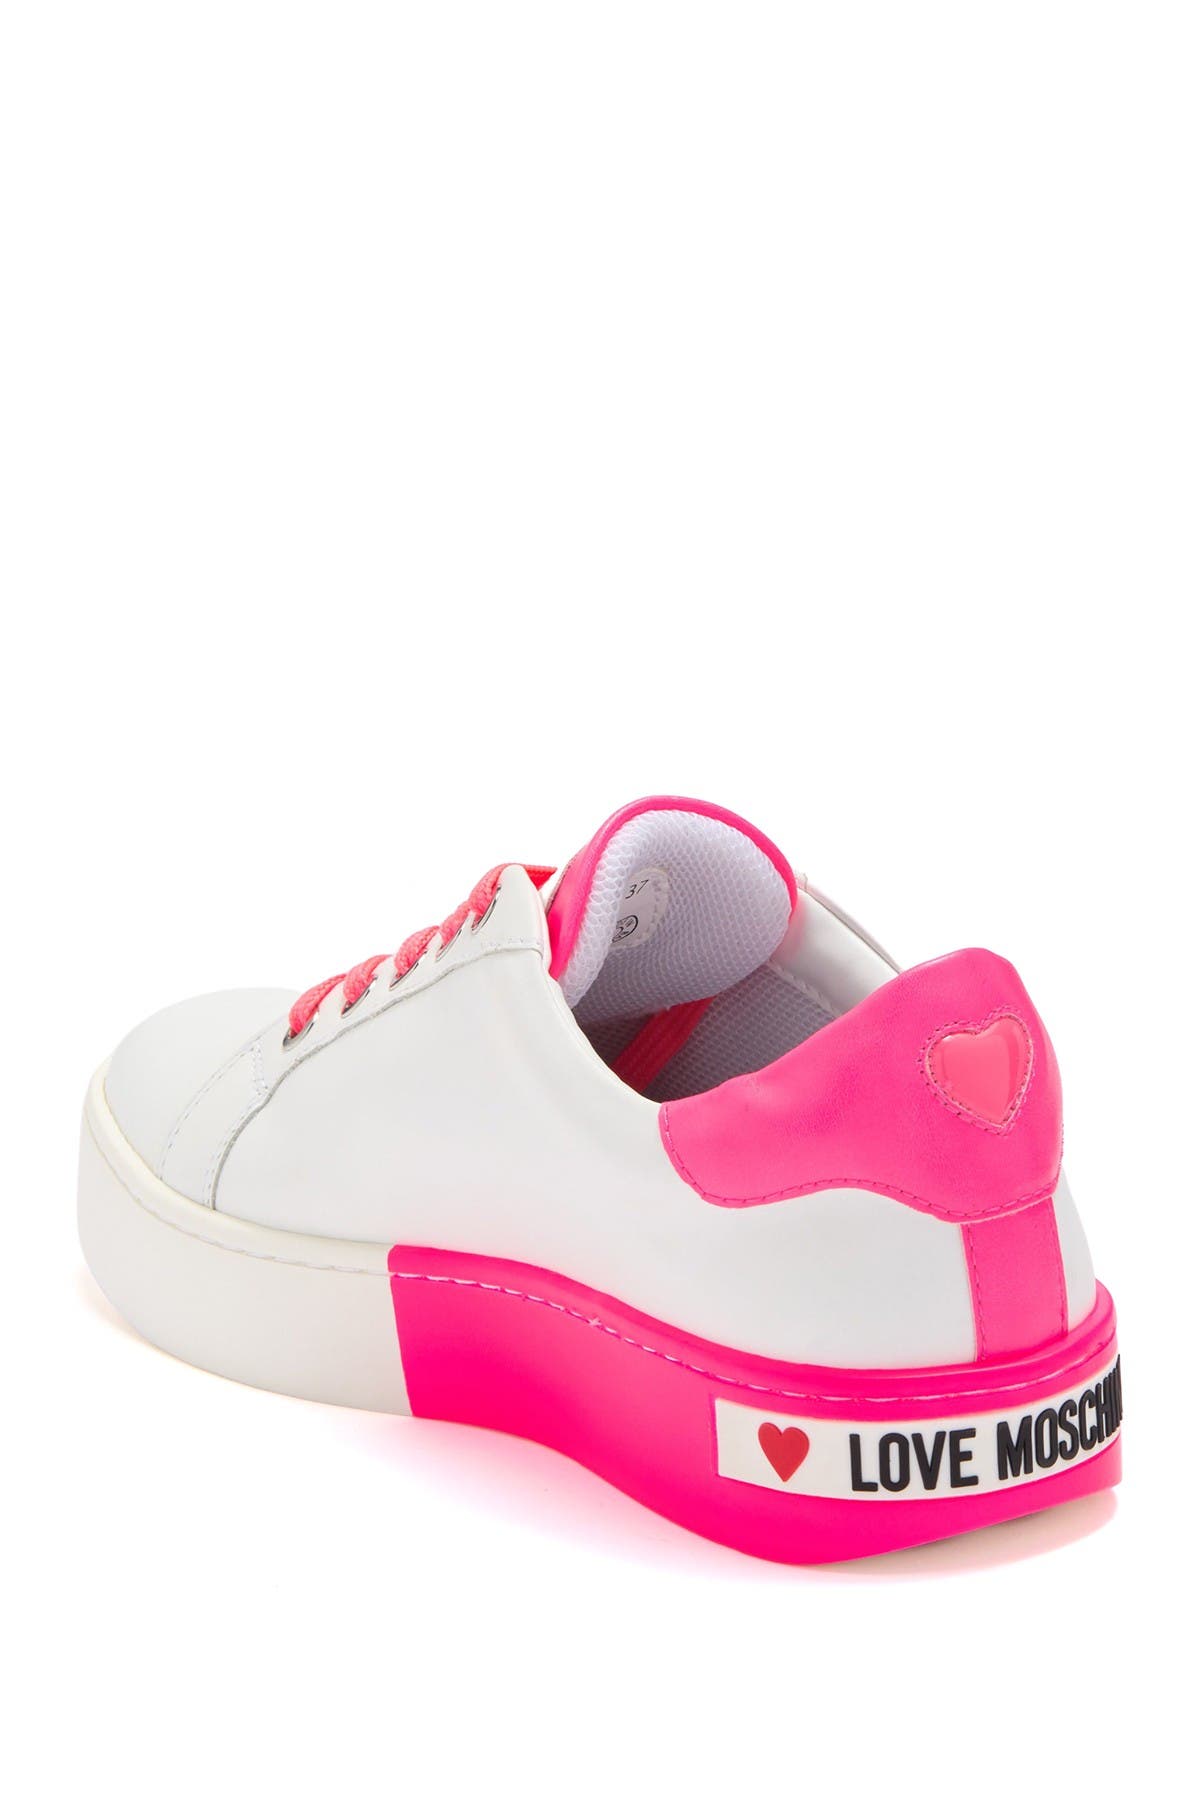 LOVE Moschino | Heart Print Two Tone Leather Sneaker | Nordstrom Rack